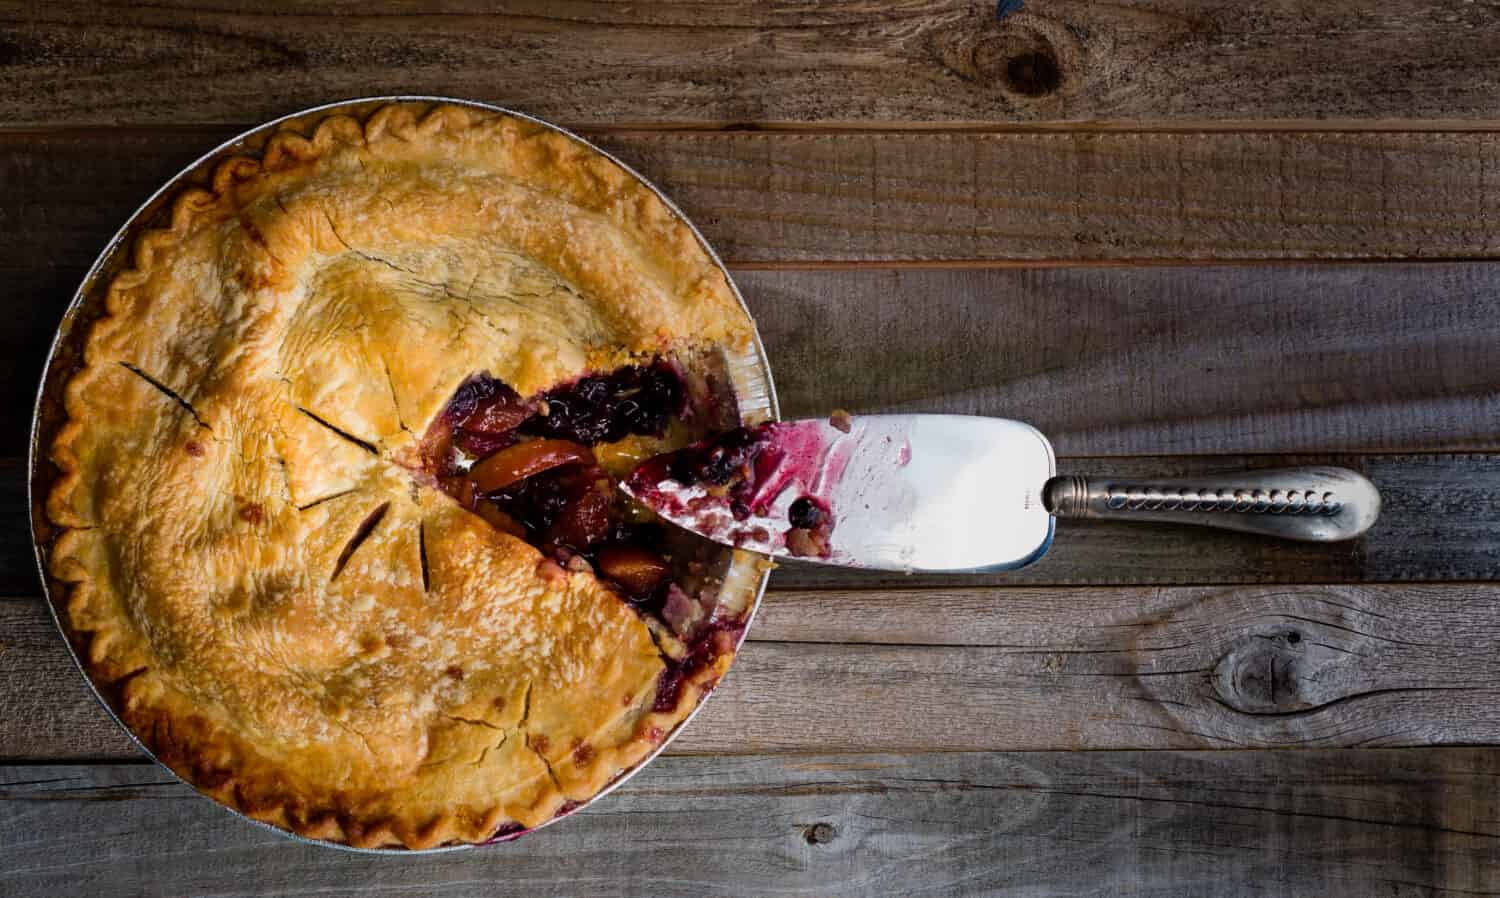 Fresh baked blueberry and peach pie sitting on a wooden surface, overhead shot.